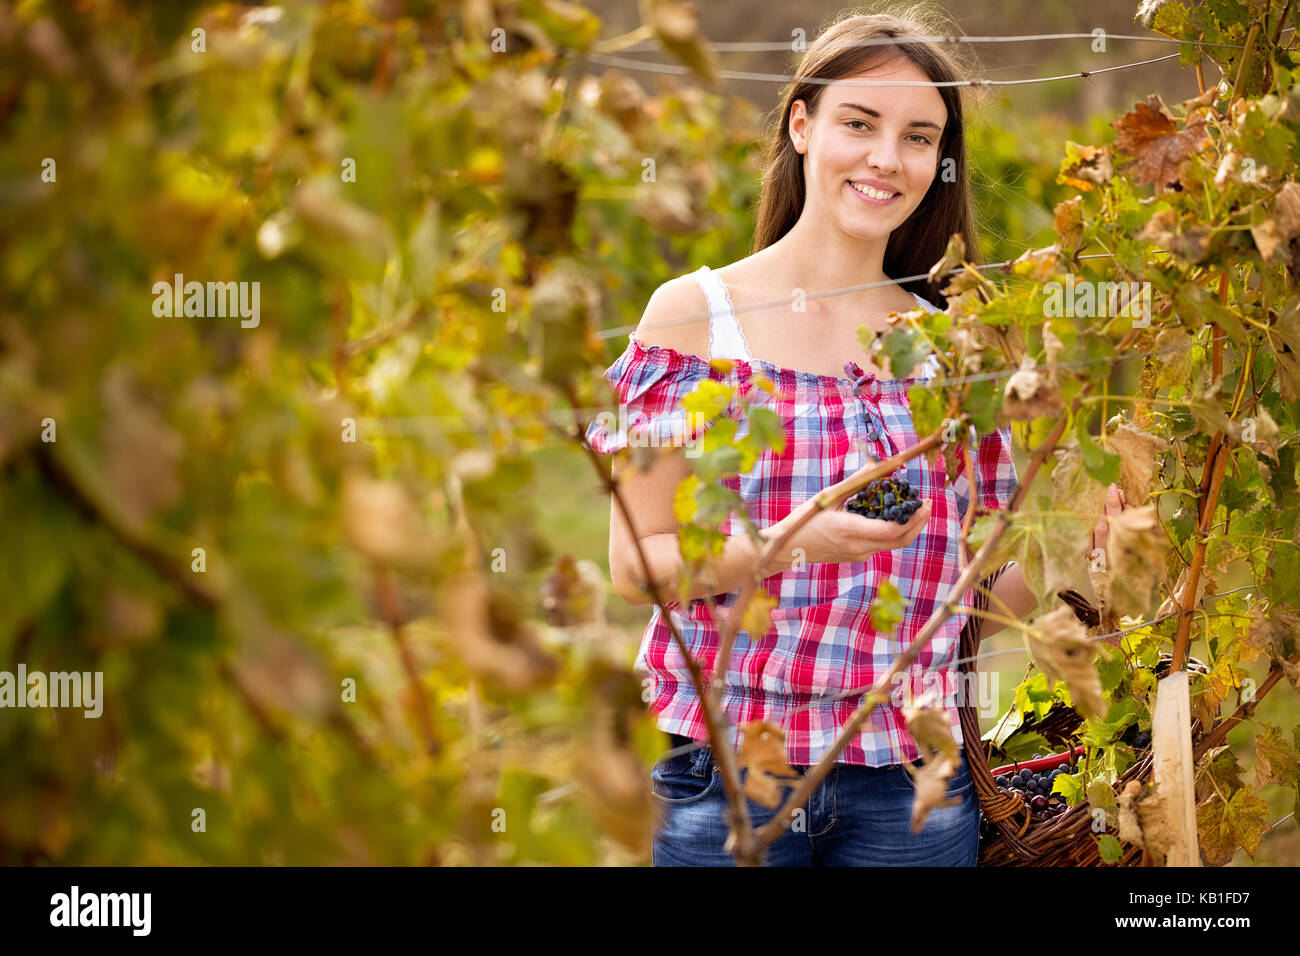 Smiling  young woman in vineyard Stock Photo